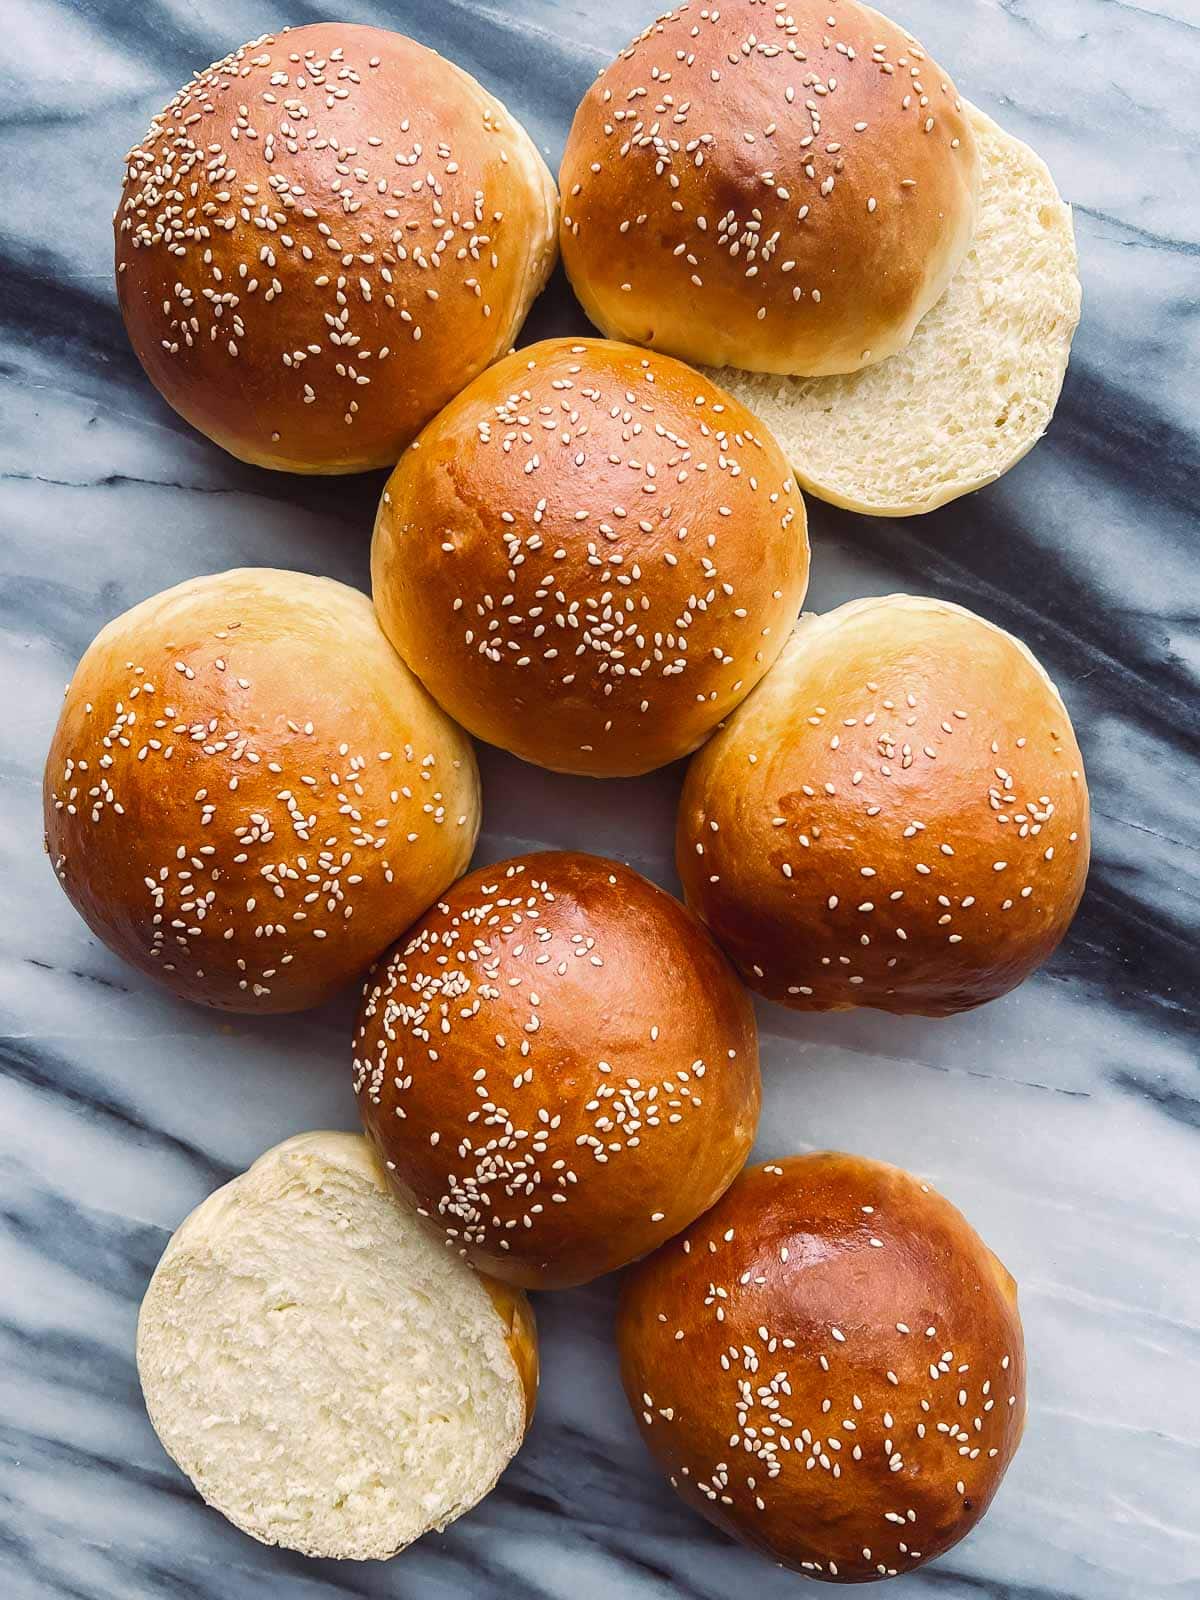 brioche-style buns with sesame seeds.